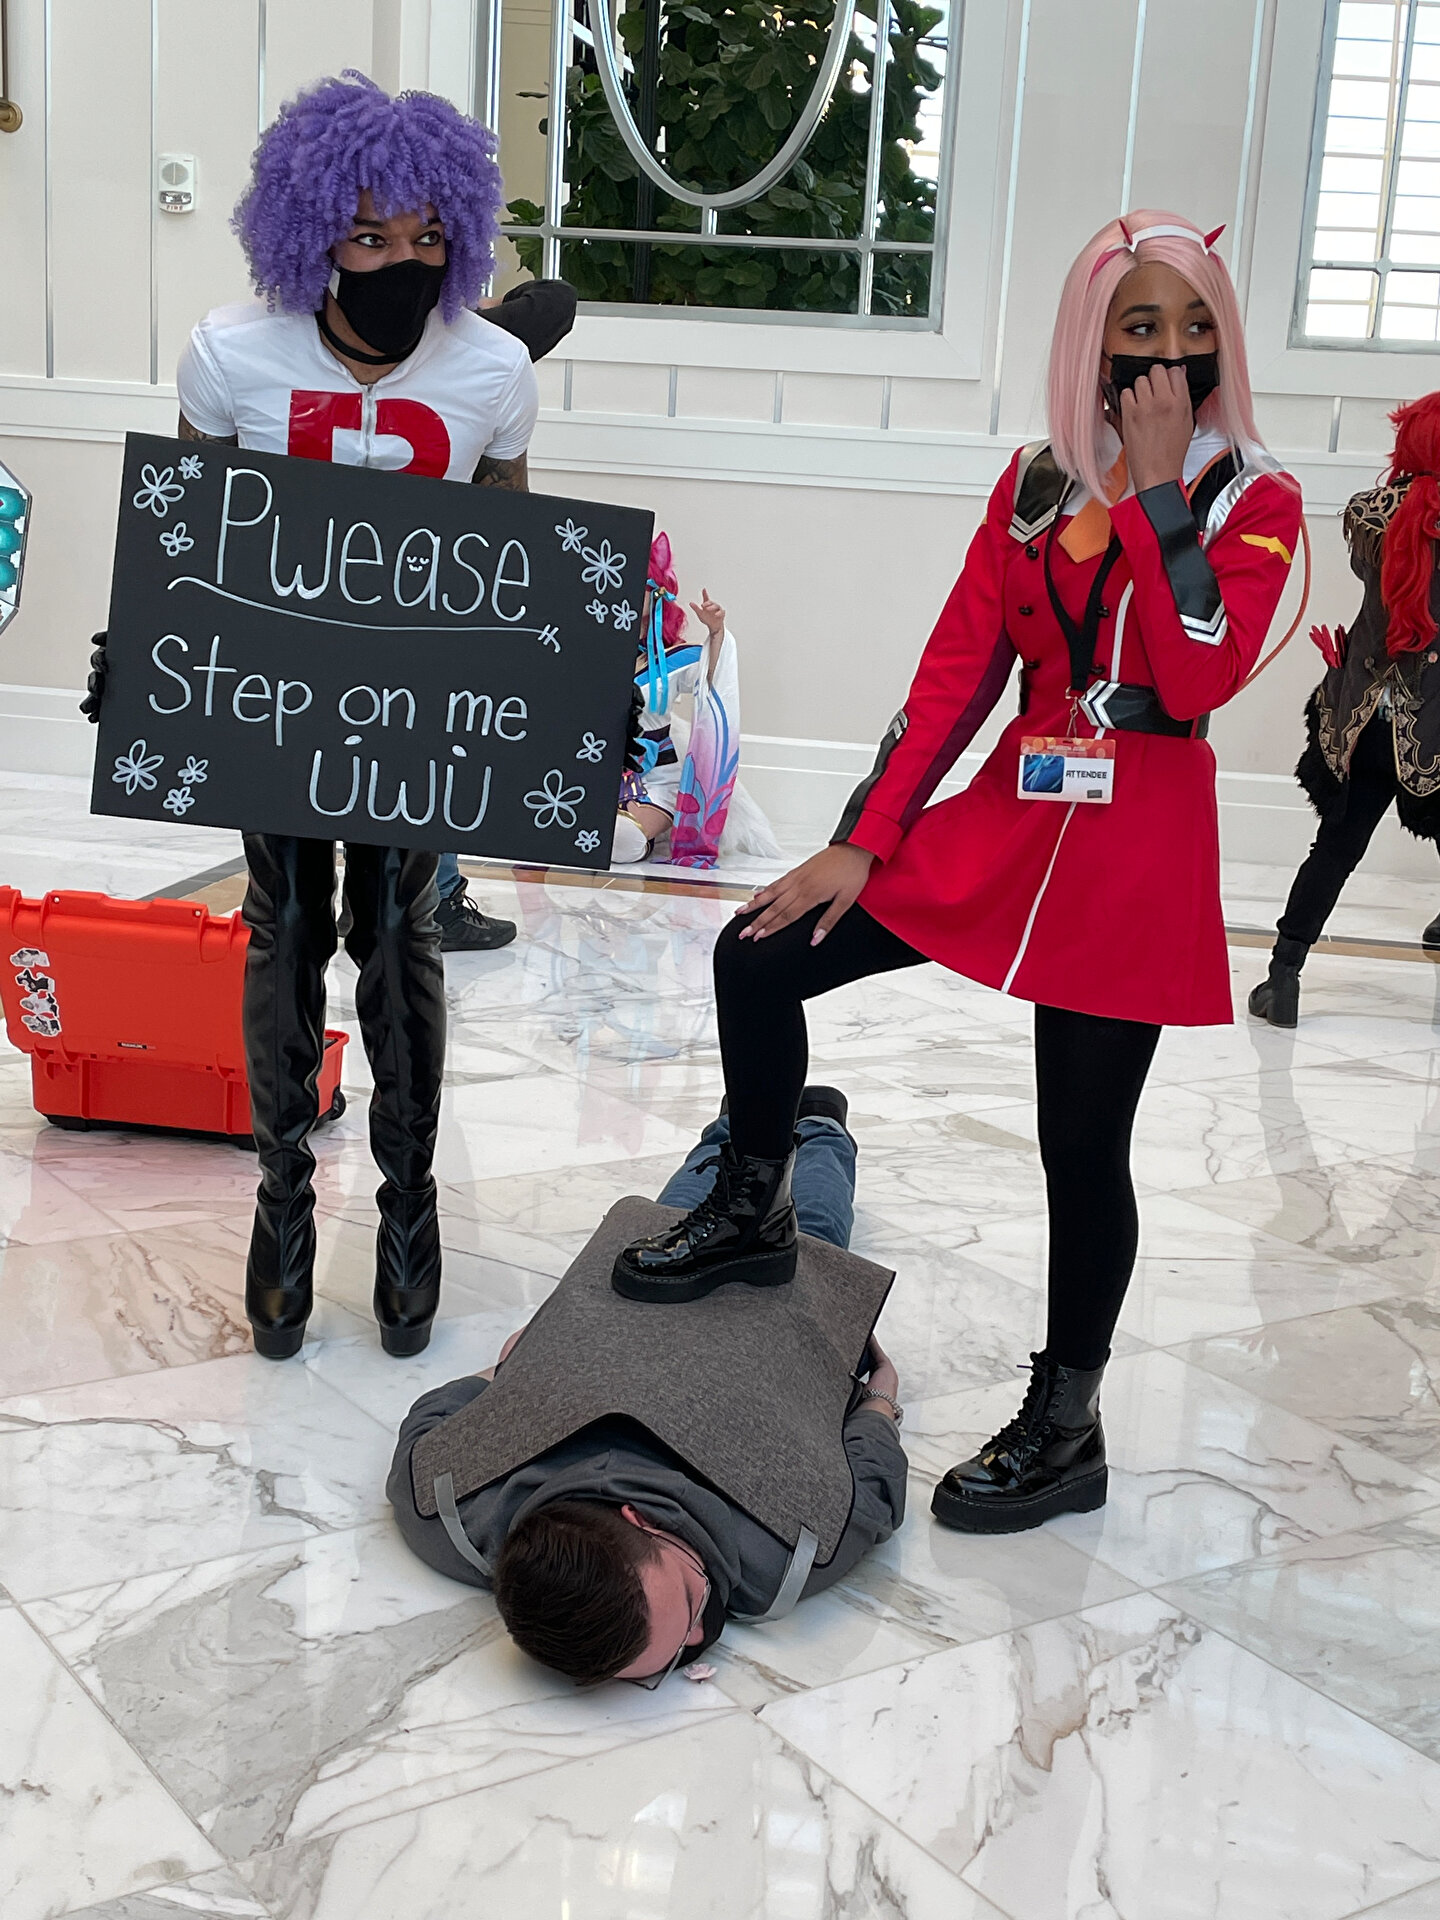 Cospix.net photo featuring Cosplay in America